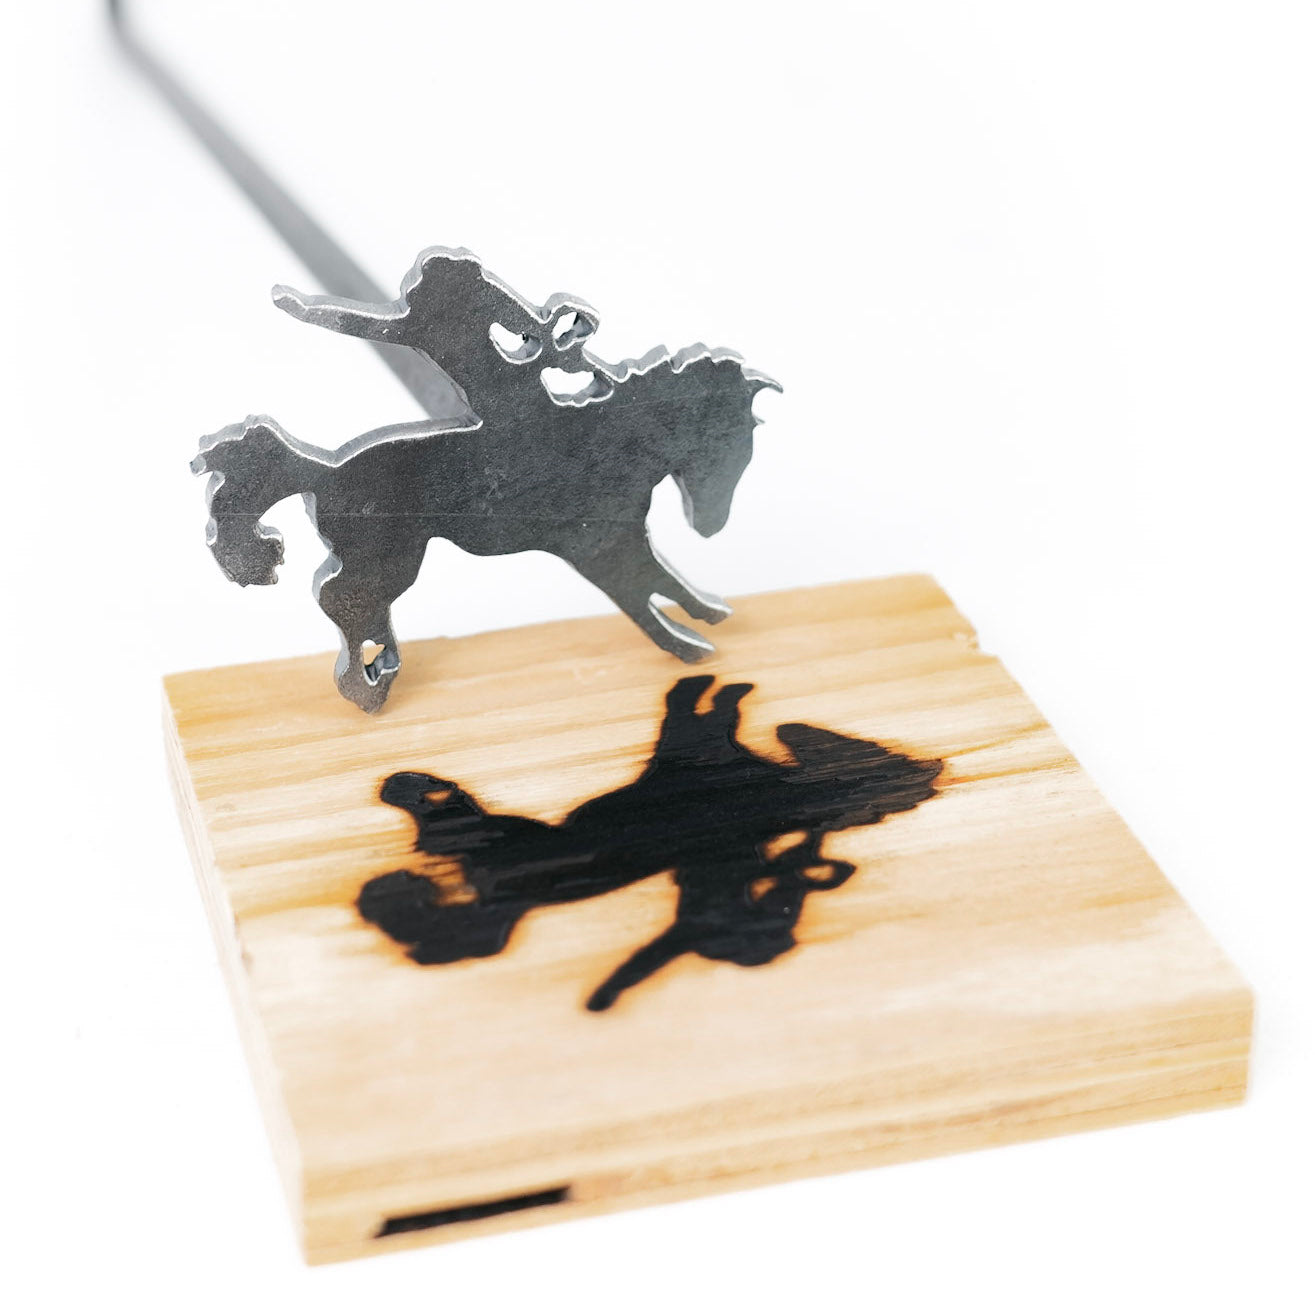 Bucking Bronco Brand - 3.5" - BBQ, Crafts, Woodworking Projects - The Heritage Forge